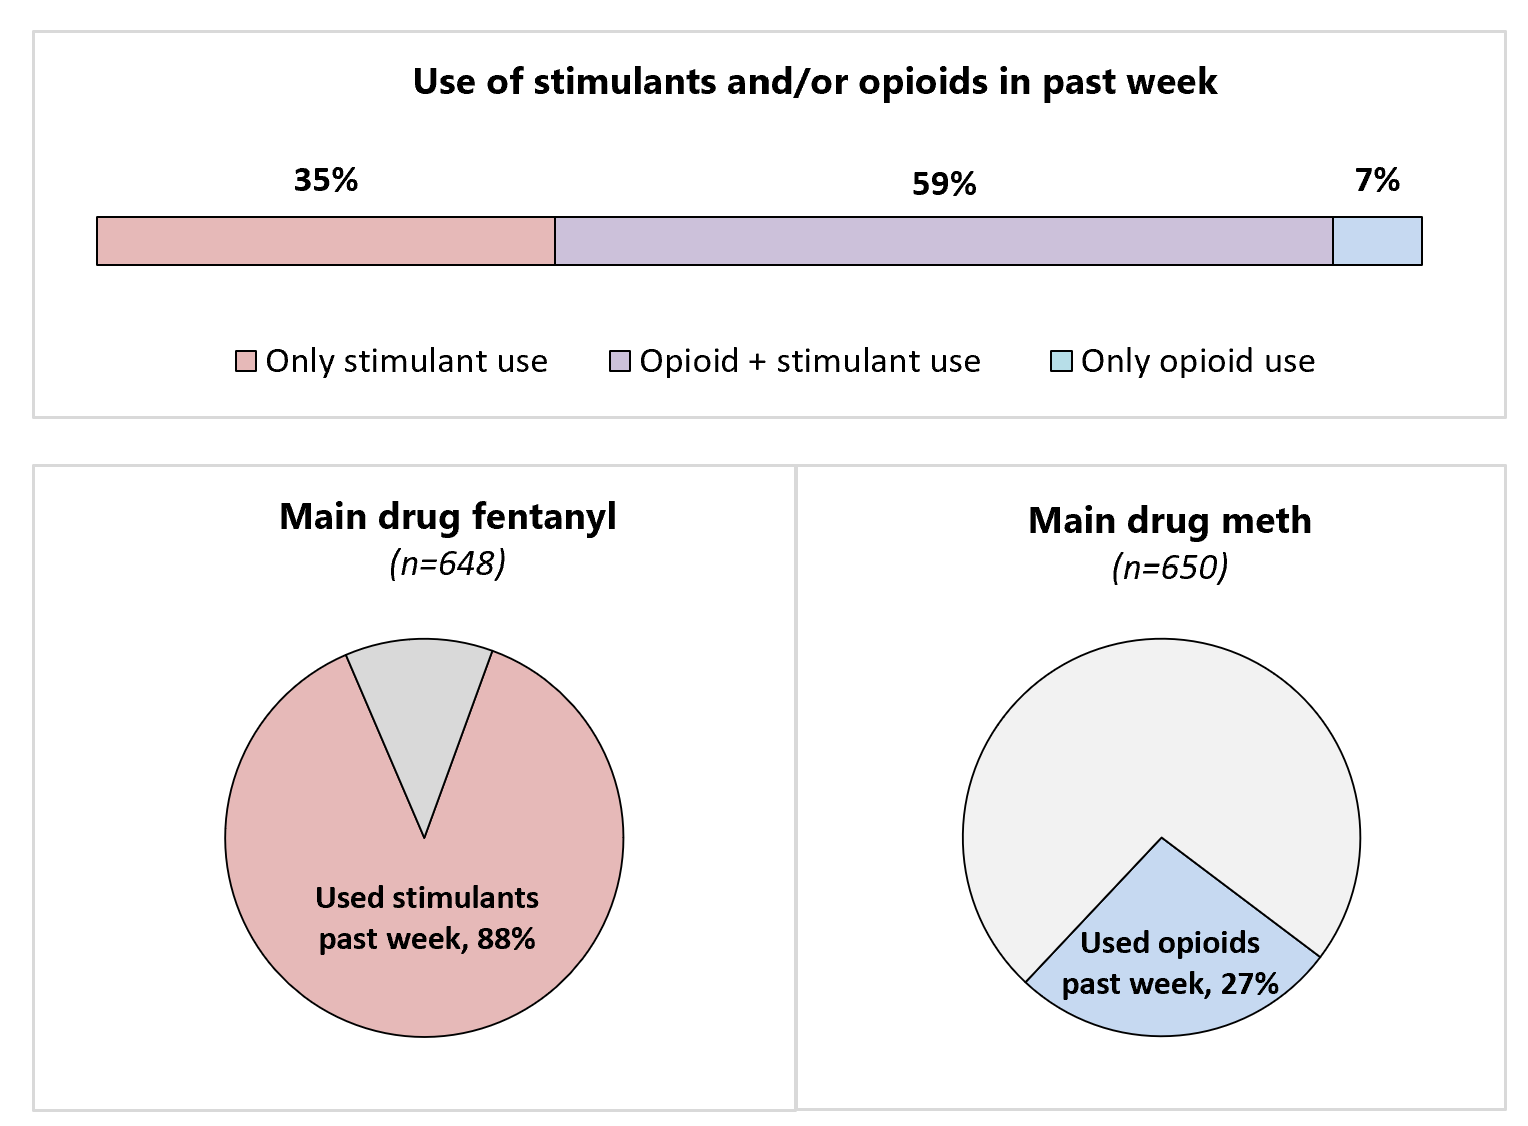 Figure 1: Top figure shows use of stimulants and/or opioids in past week. 35% of the group only used stimulants, 59% used opioids and stimulants, and 7% used only opioids. Below that are two pie charts. Left shows that of 648 people whose main drug was fentanyl, 88% also used stimulants in the past week. Right shows that of 650 whose main drug was meth, 27% also used opioids in the past week.  